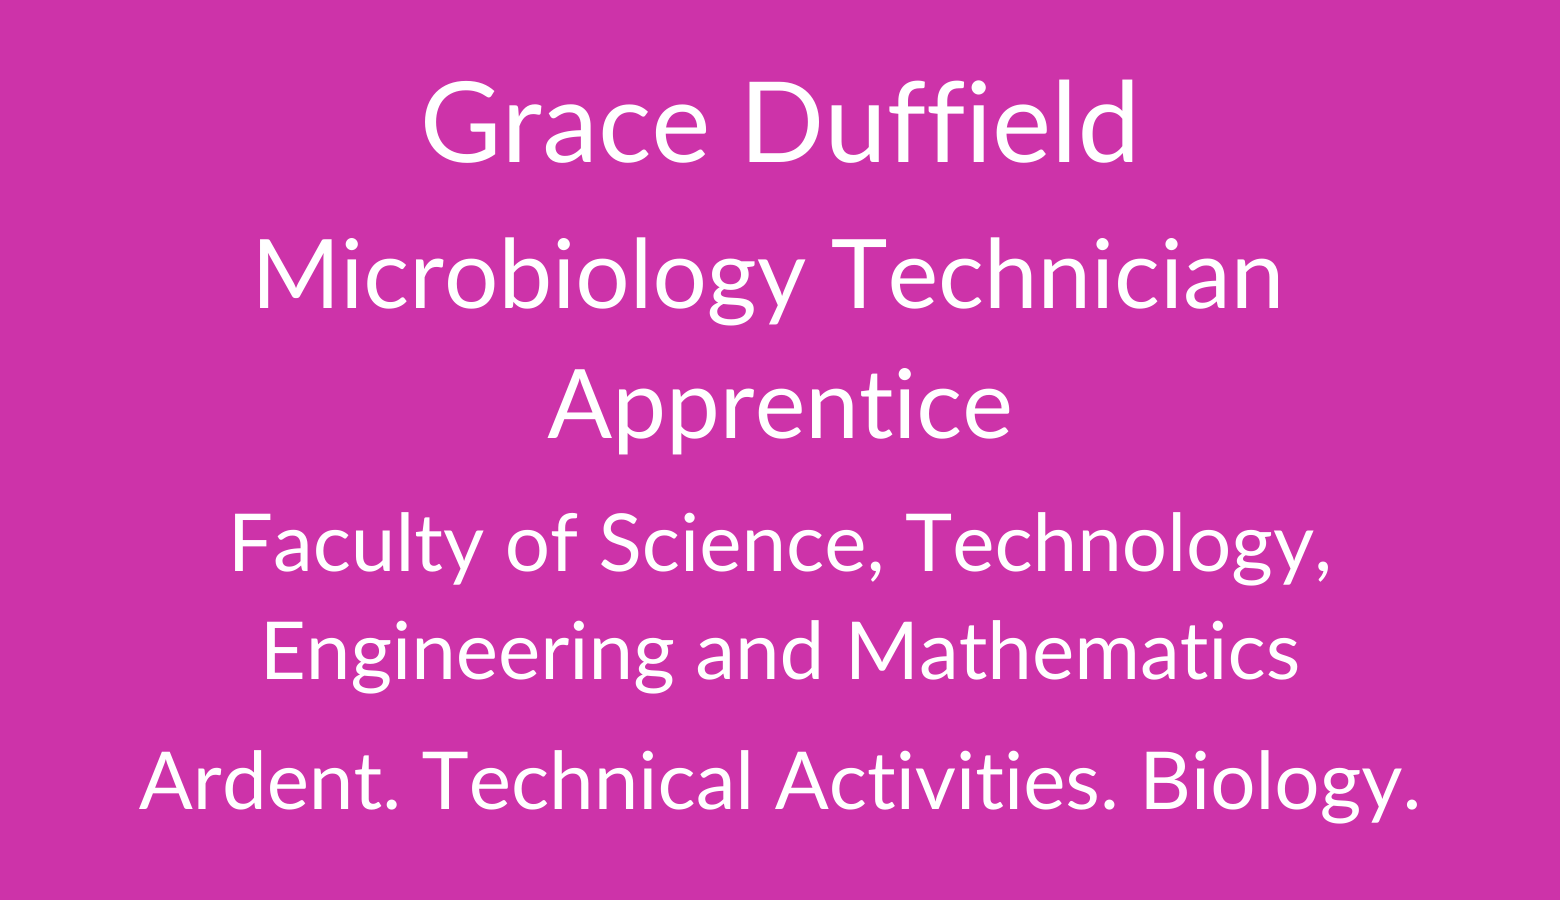 Grace Duffield. Microbiology Technician Apprentice. Faculty of Science. Technology, Engineering and Mathematics. Ardent, Technical Activities. Biology. 